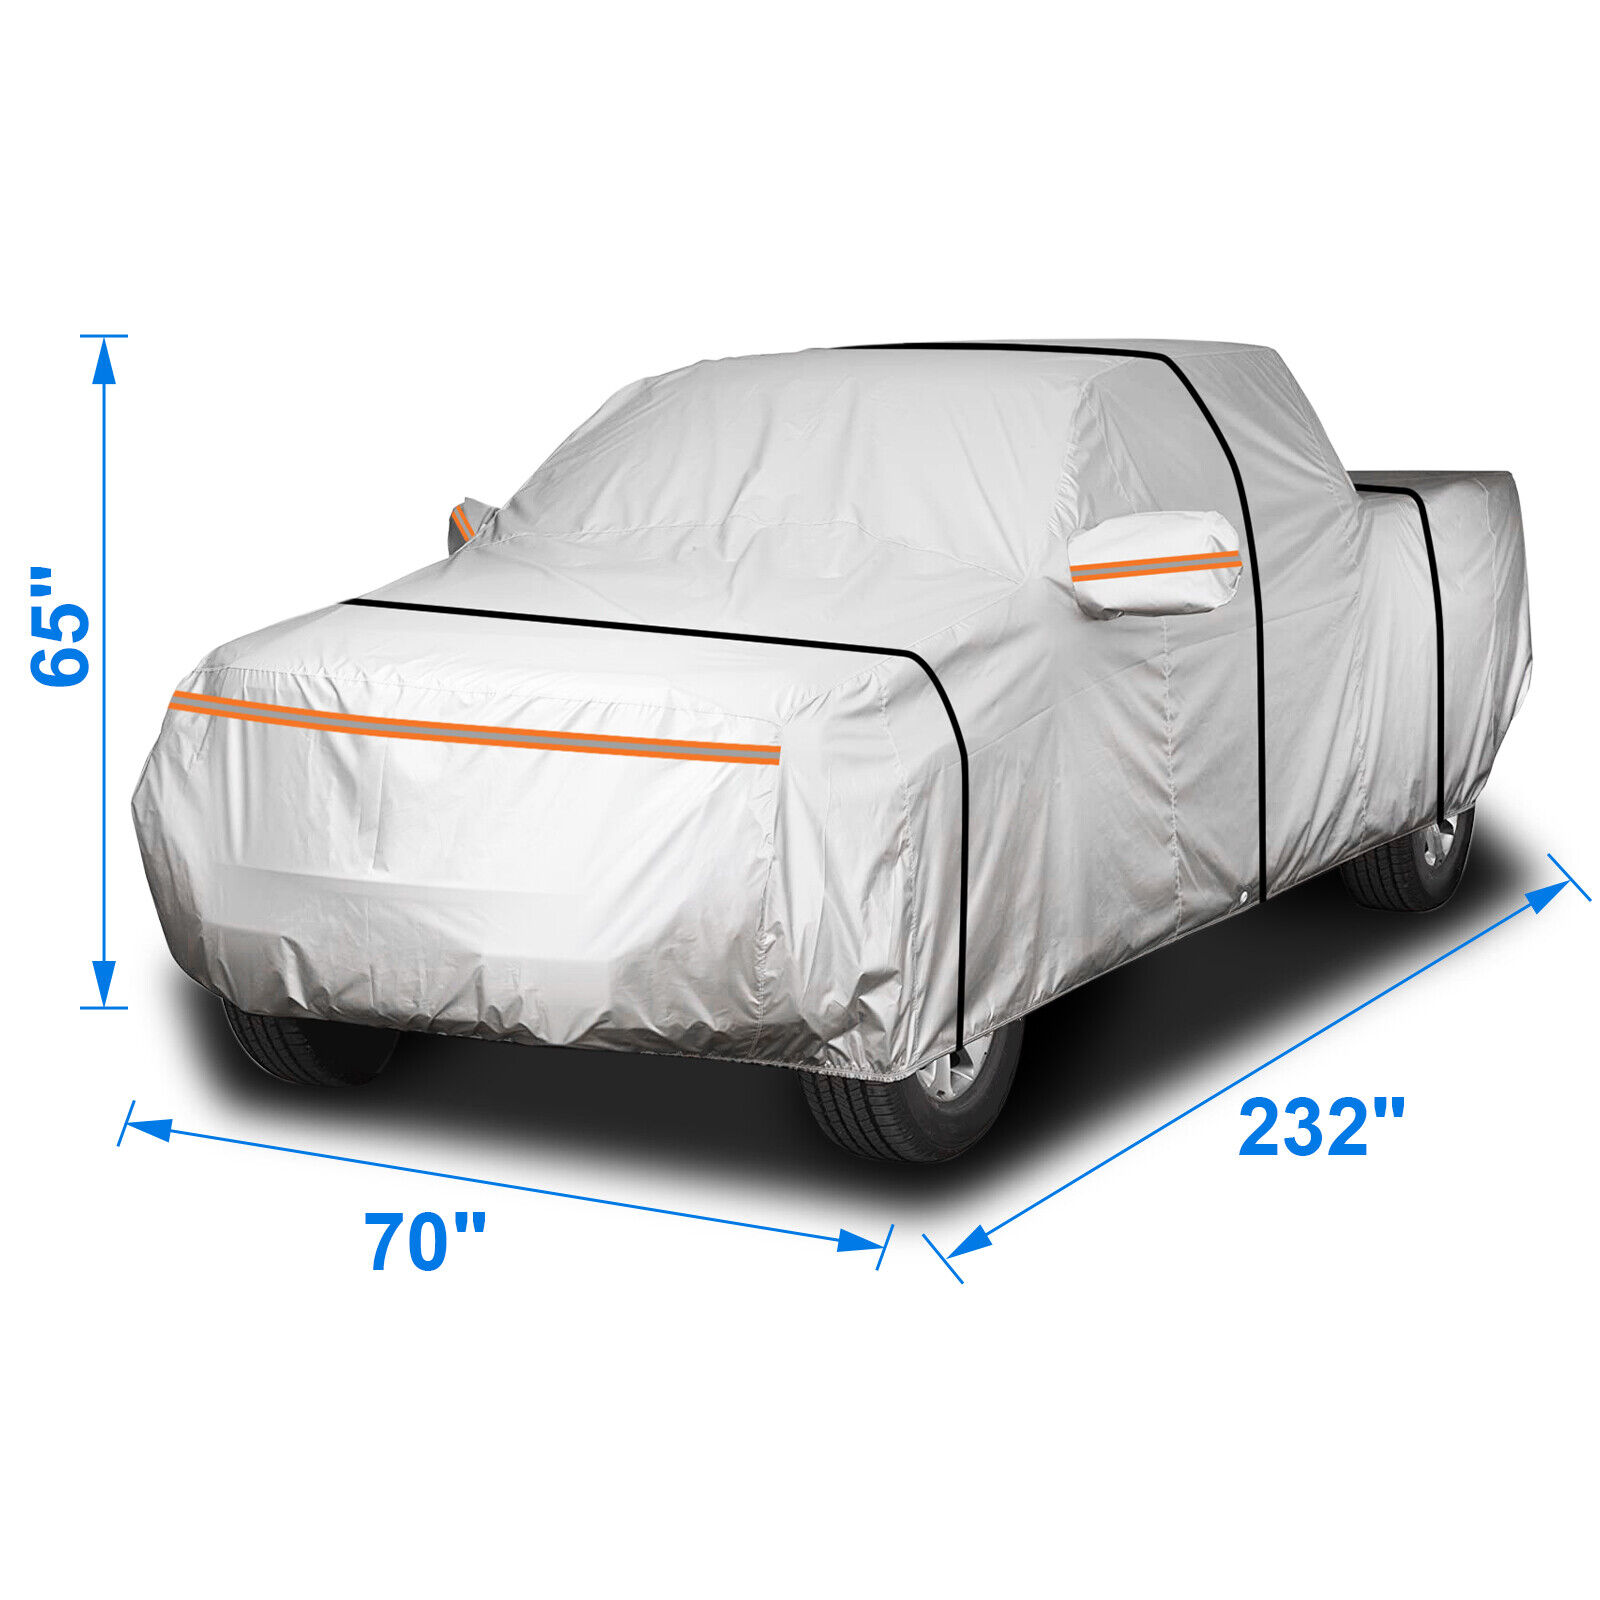 For Dodge Ram Pickup Truck Car Cover 100% Waterproof Thickened Cotton Upgraded